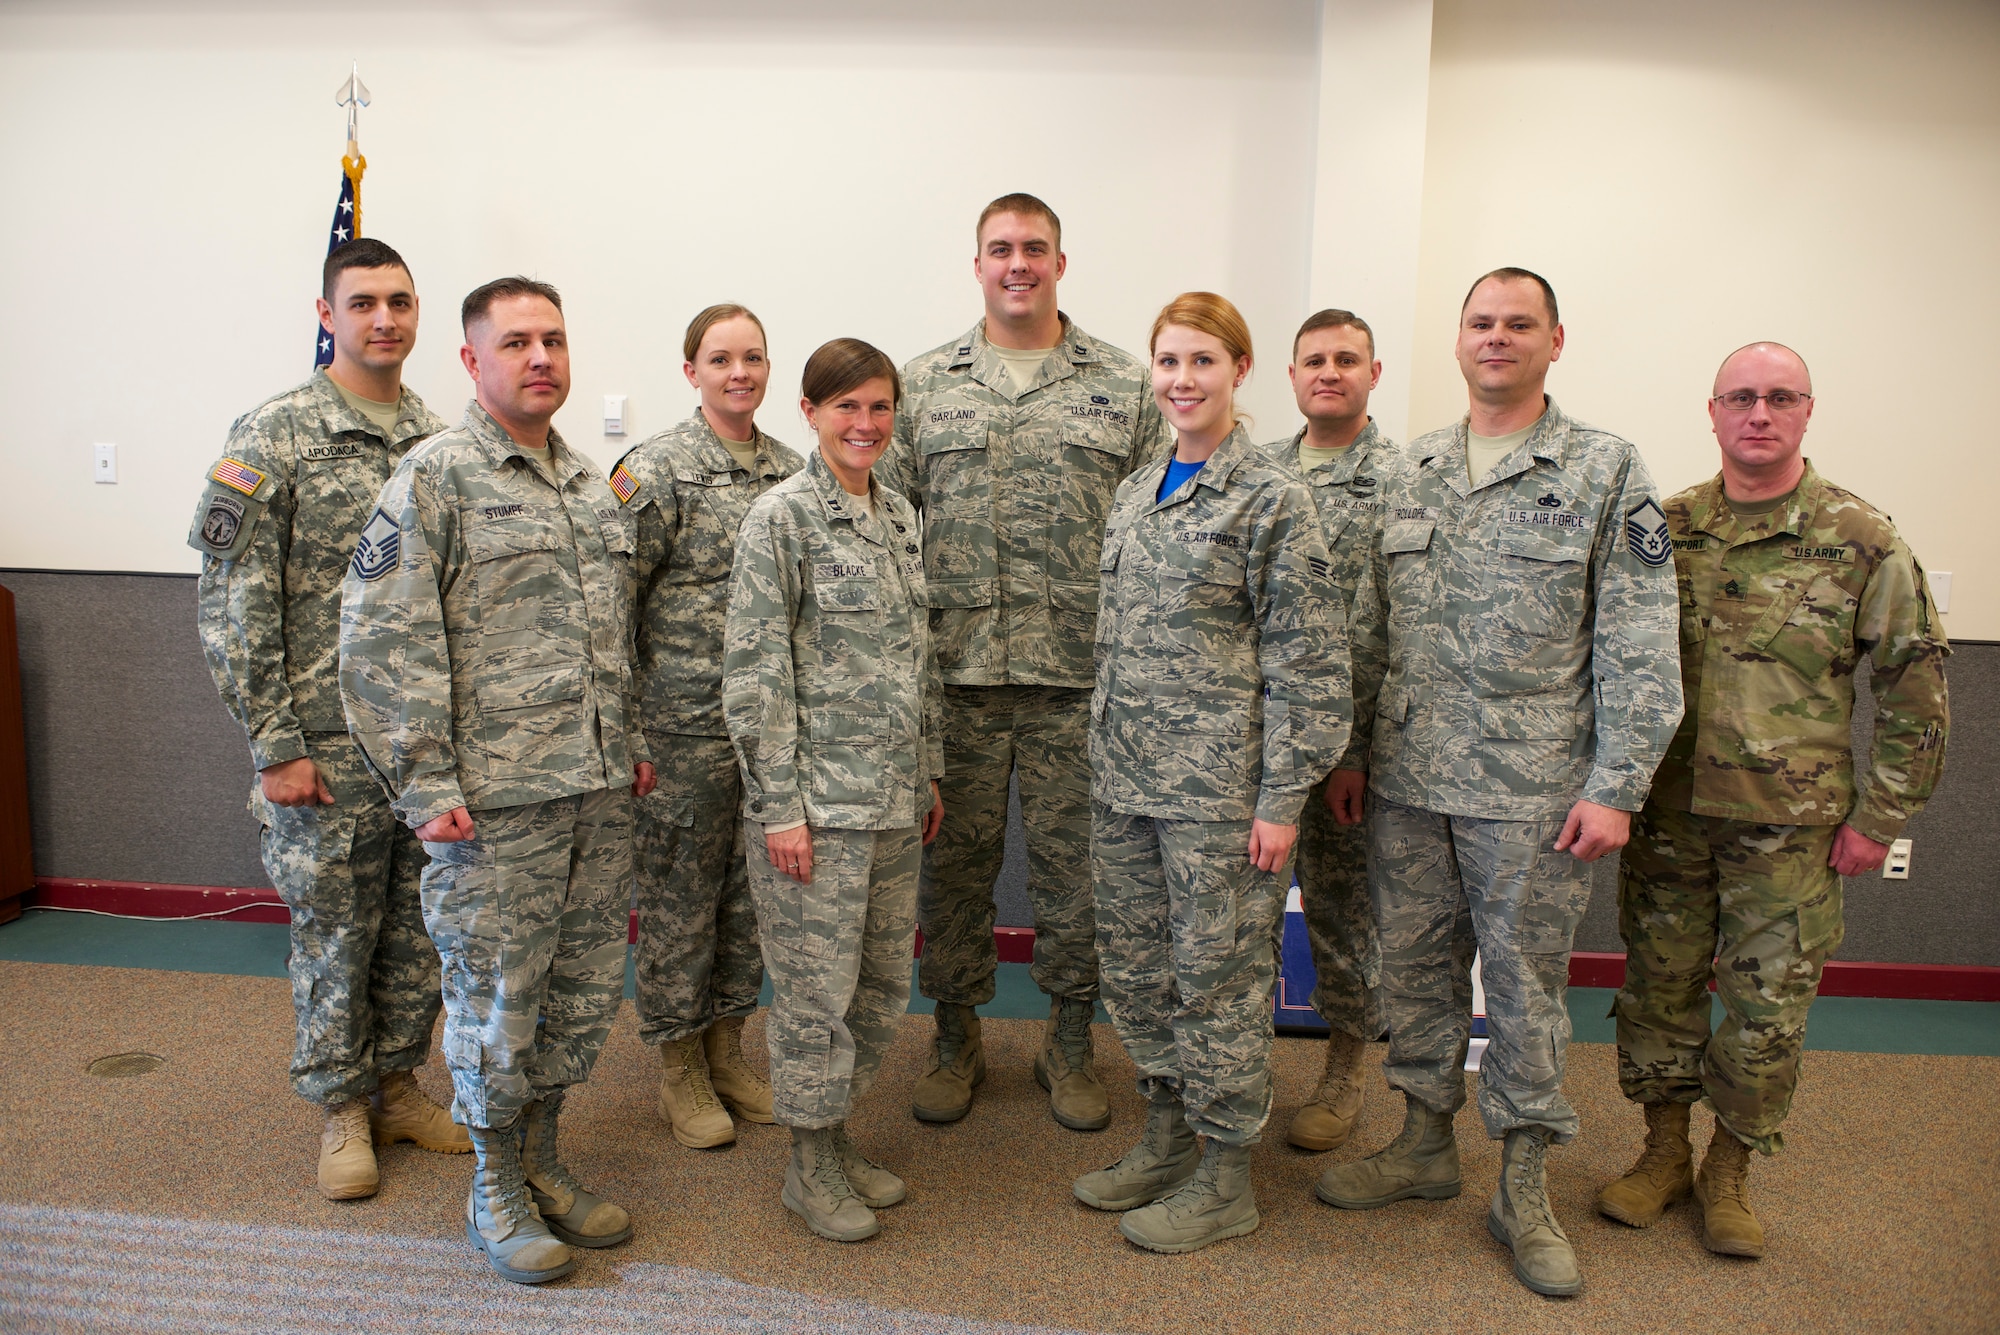 U.S. Air Force Capt. Benjamin N. Garland, Public Affairs Officer and offensive lineman for the Atlanta Falcons, assigned to the 140th Wing, receives a token of thanks from the Army National Guard at Buckley Air Force Base Feb. 21, 2016. A ceremony was held to honor the collaborative effort put forth by Garland and the Army National Guardsmen to ensure service members understand the importance of head injuries as they relate to the military and the National Football League. (U.S. Air National Guard photo by Senior Airman Bobbie Reynolds)